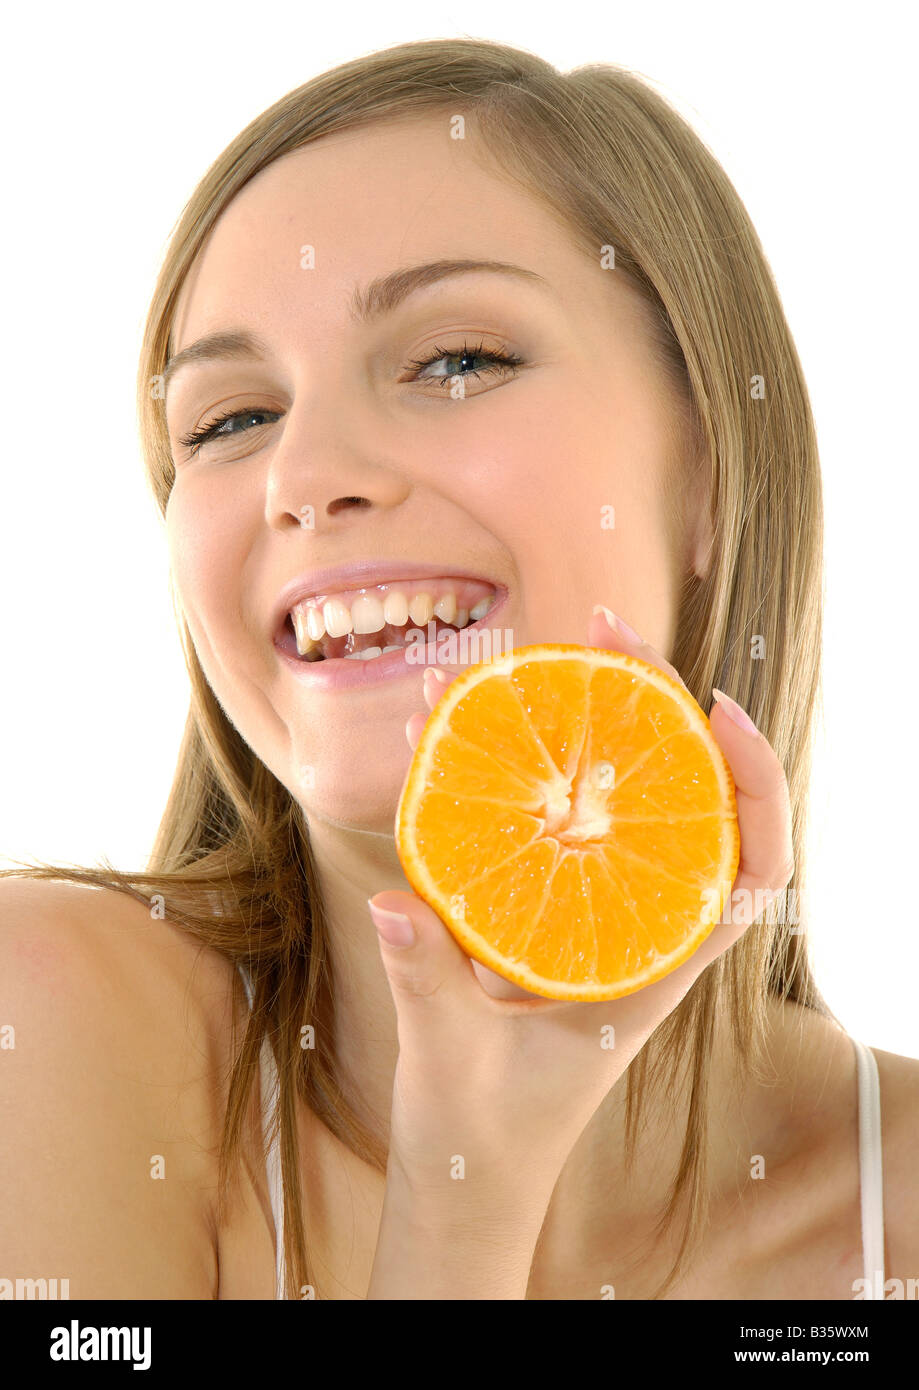 Portrait of a young woman holding a cross section of a orange and grining Stock Photo